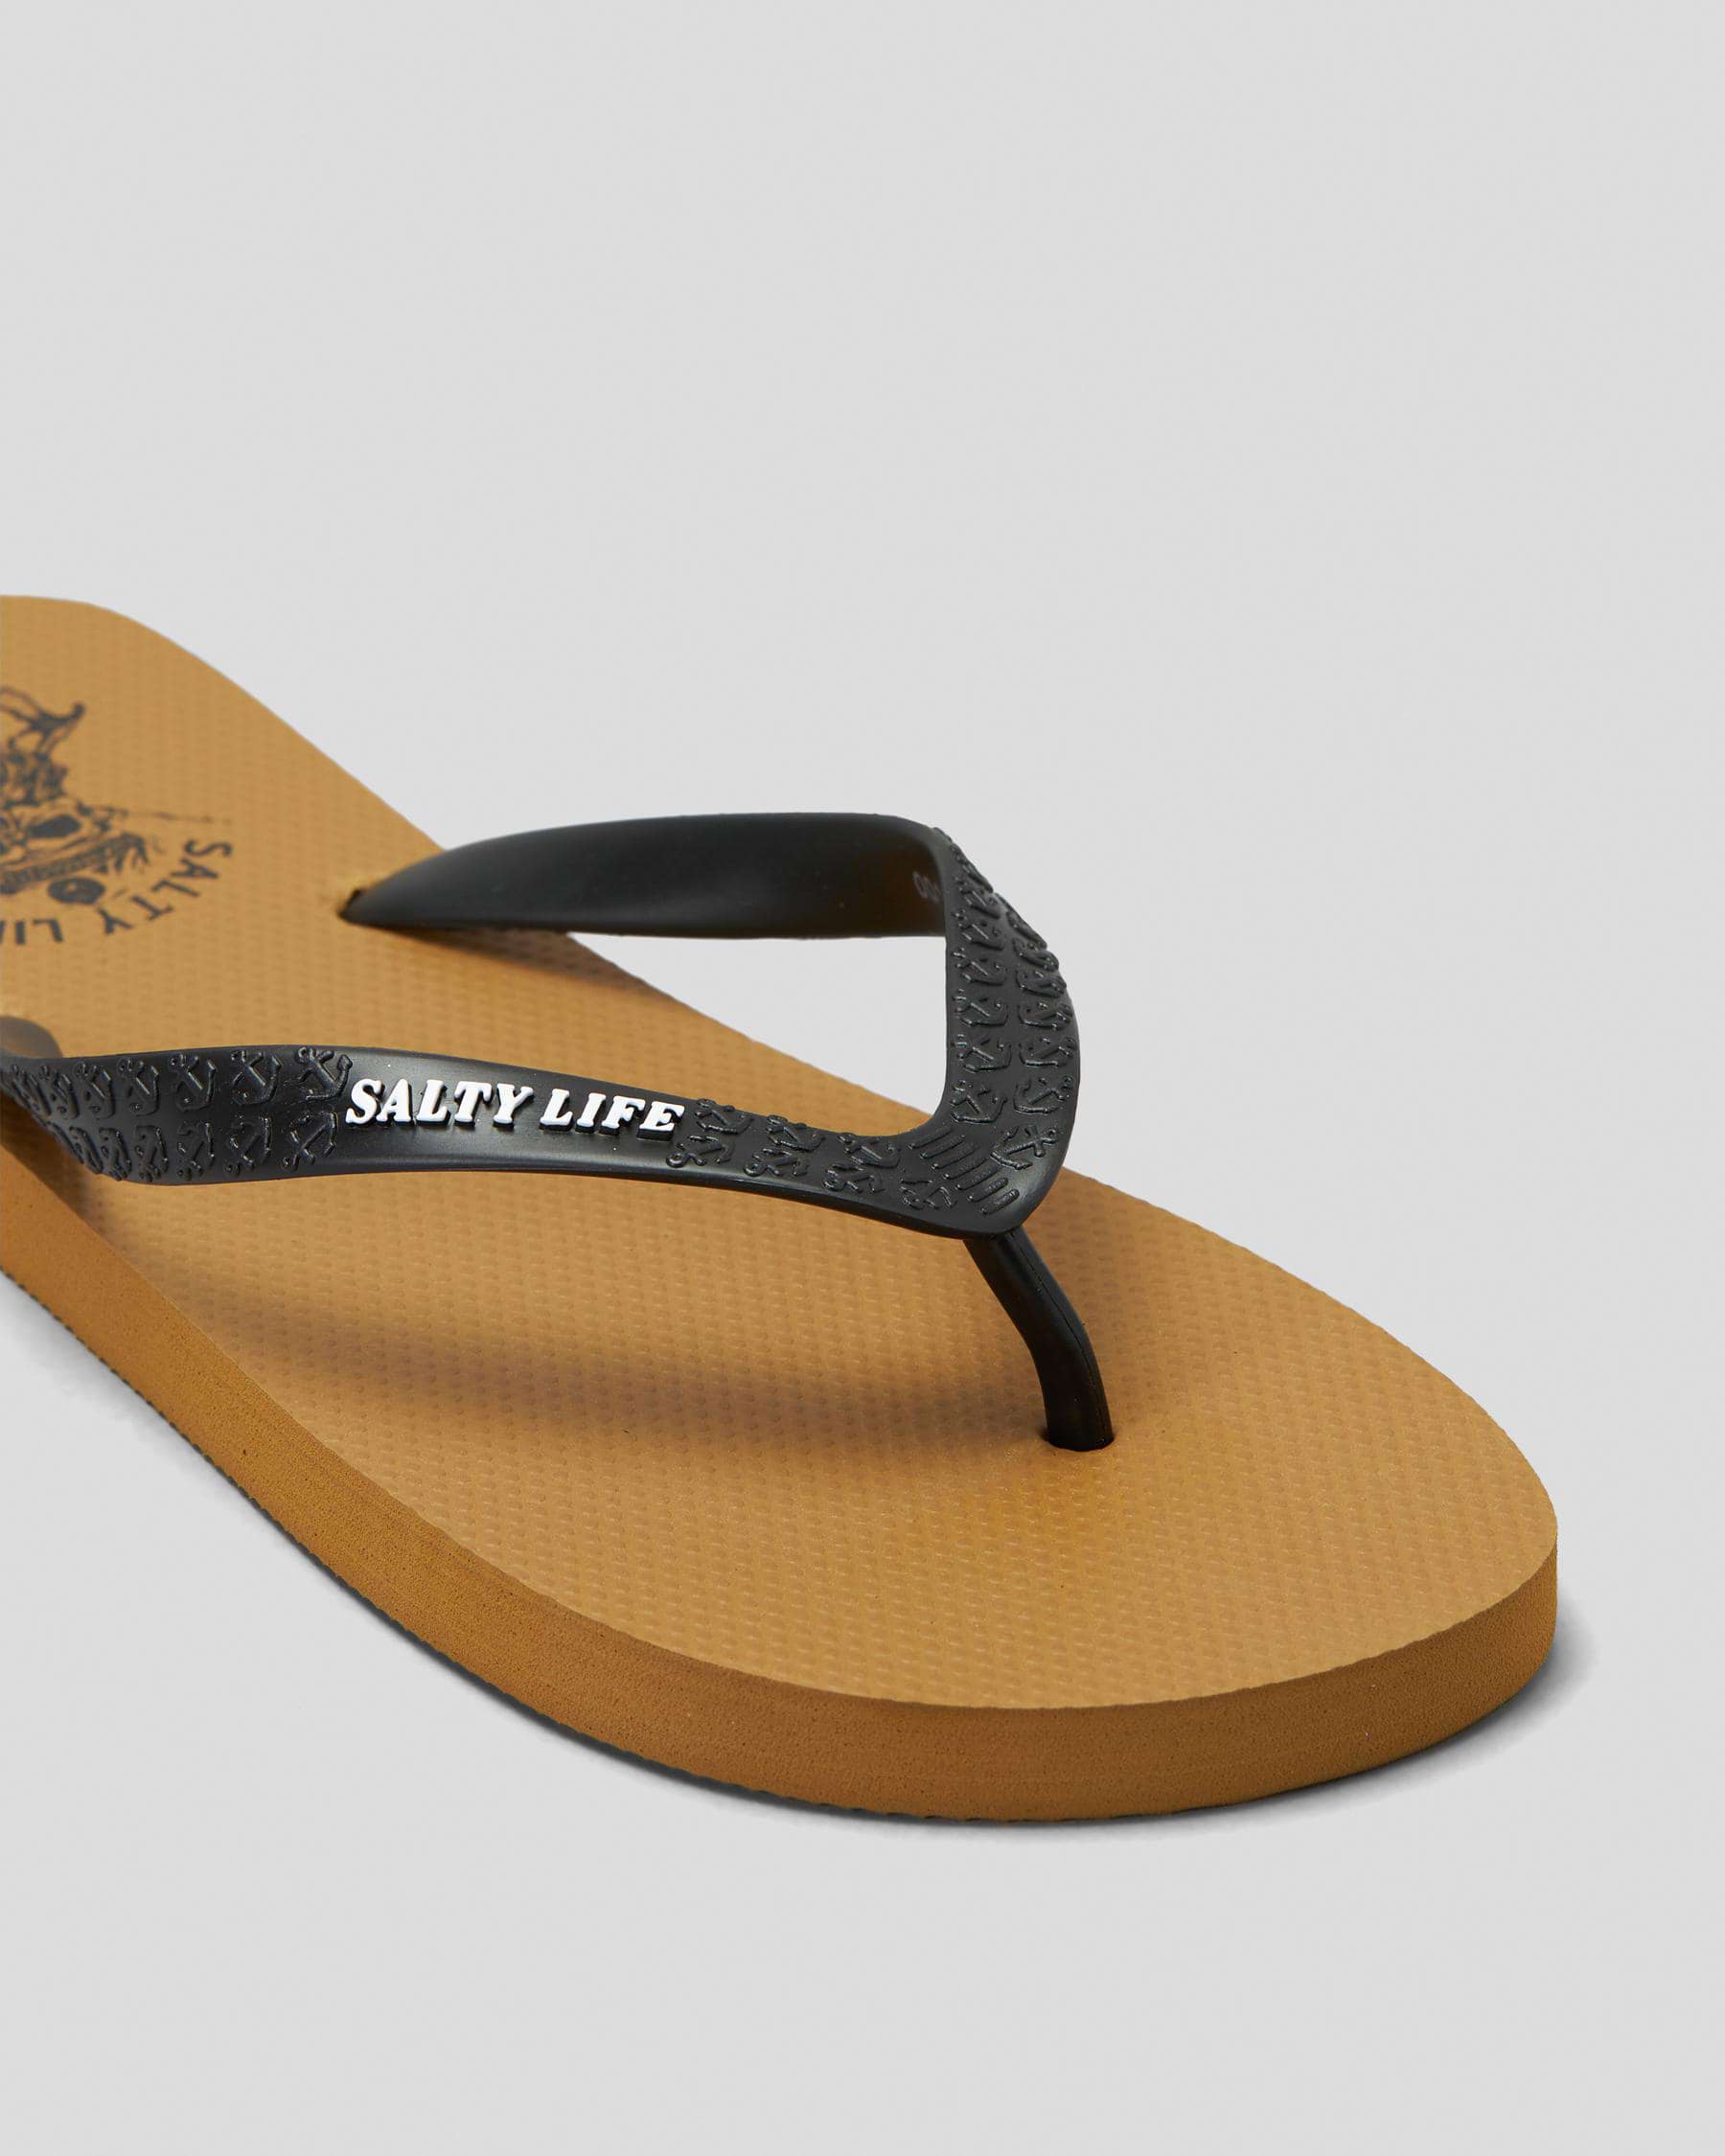 Salty Life Overboard Thongs In Tan/black - FREE* Shipping & Easy ...